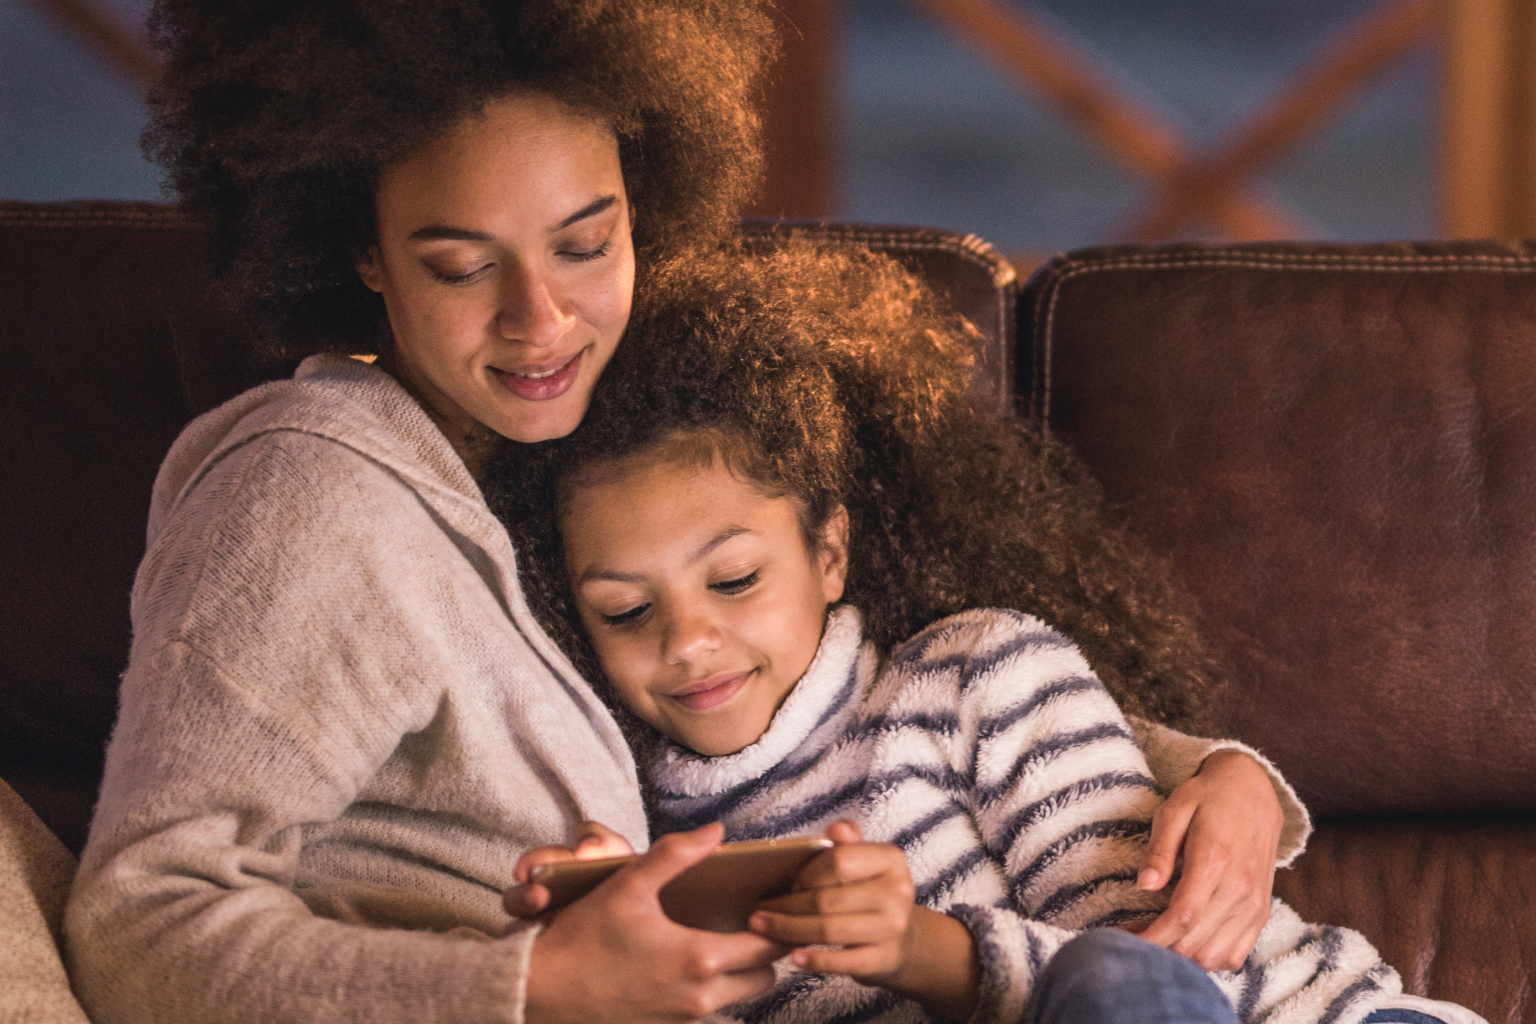 A mother and daughter cuddling on a couch while looking at a phone.